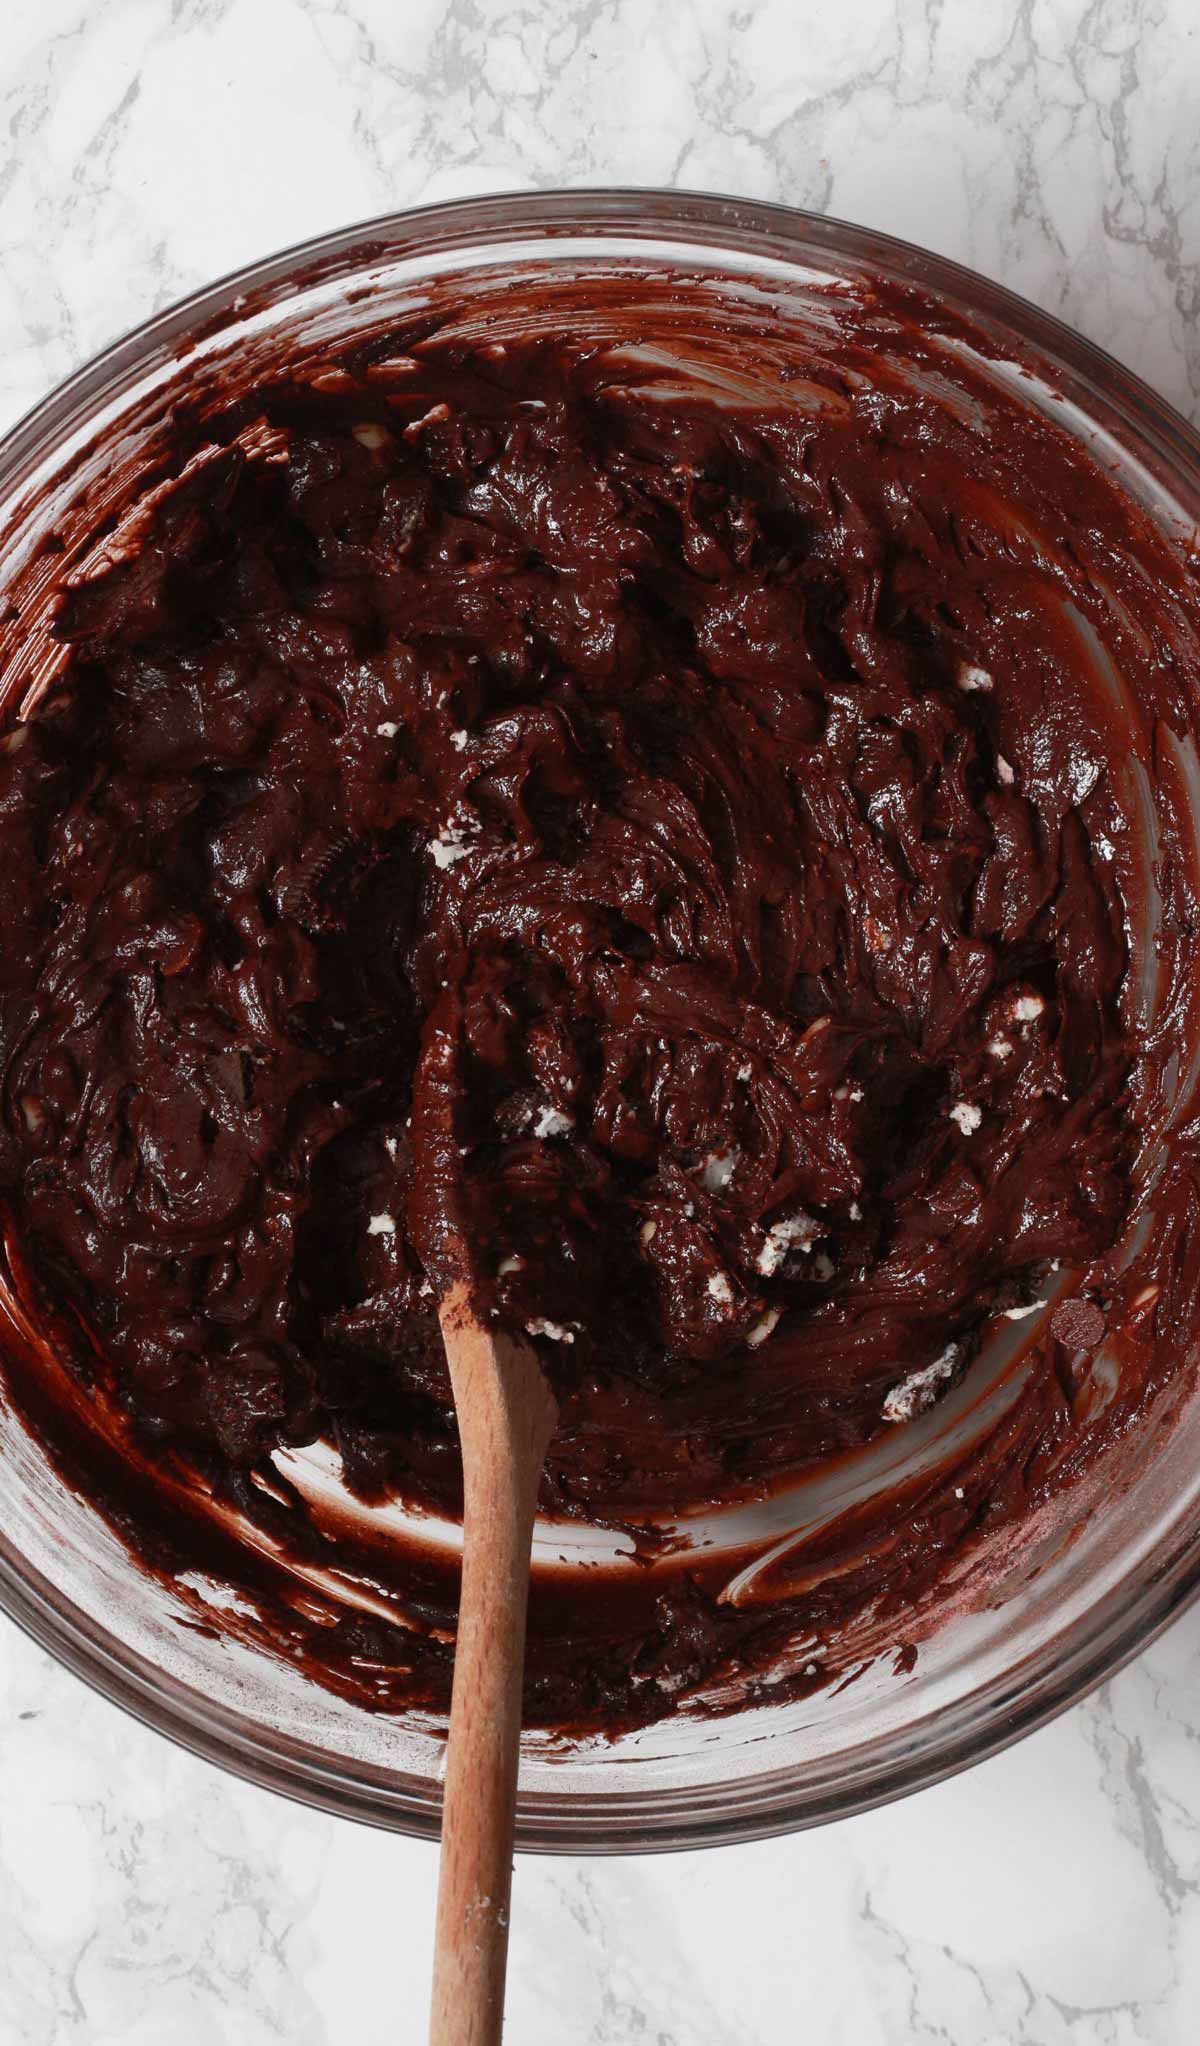 Brownie Batter In Glass Bowl